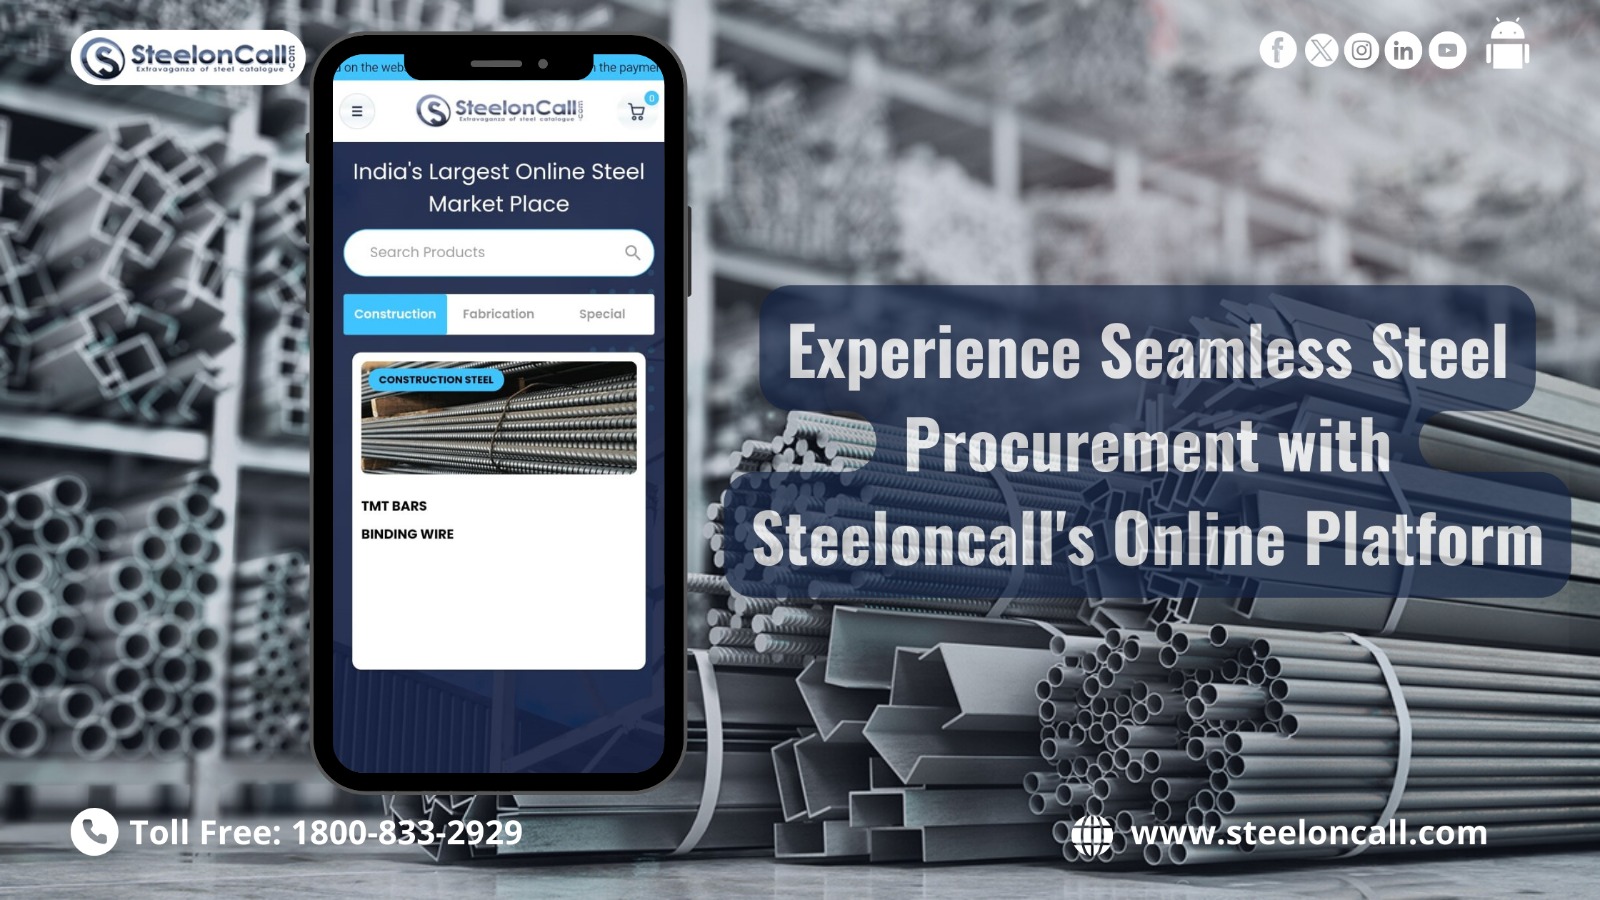 Experience Seamless Steel Procurement with Steeloncall's Online Platform